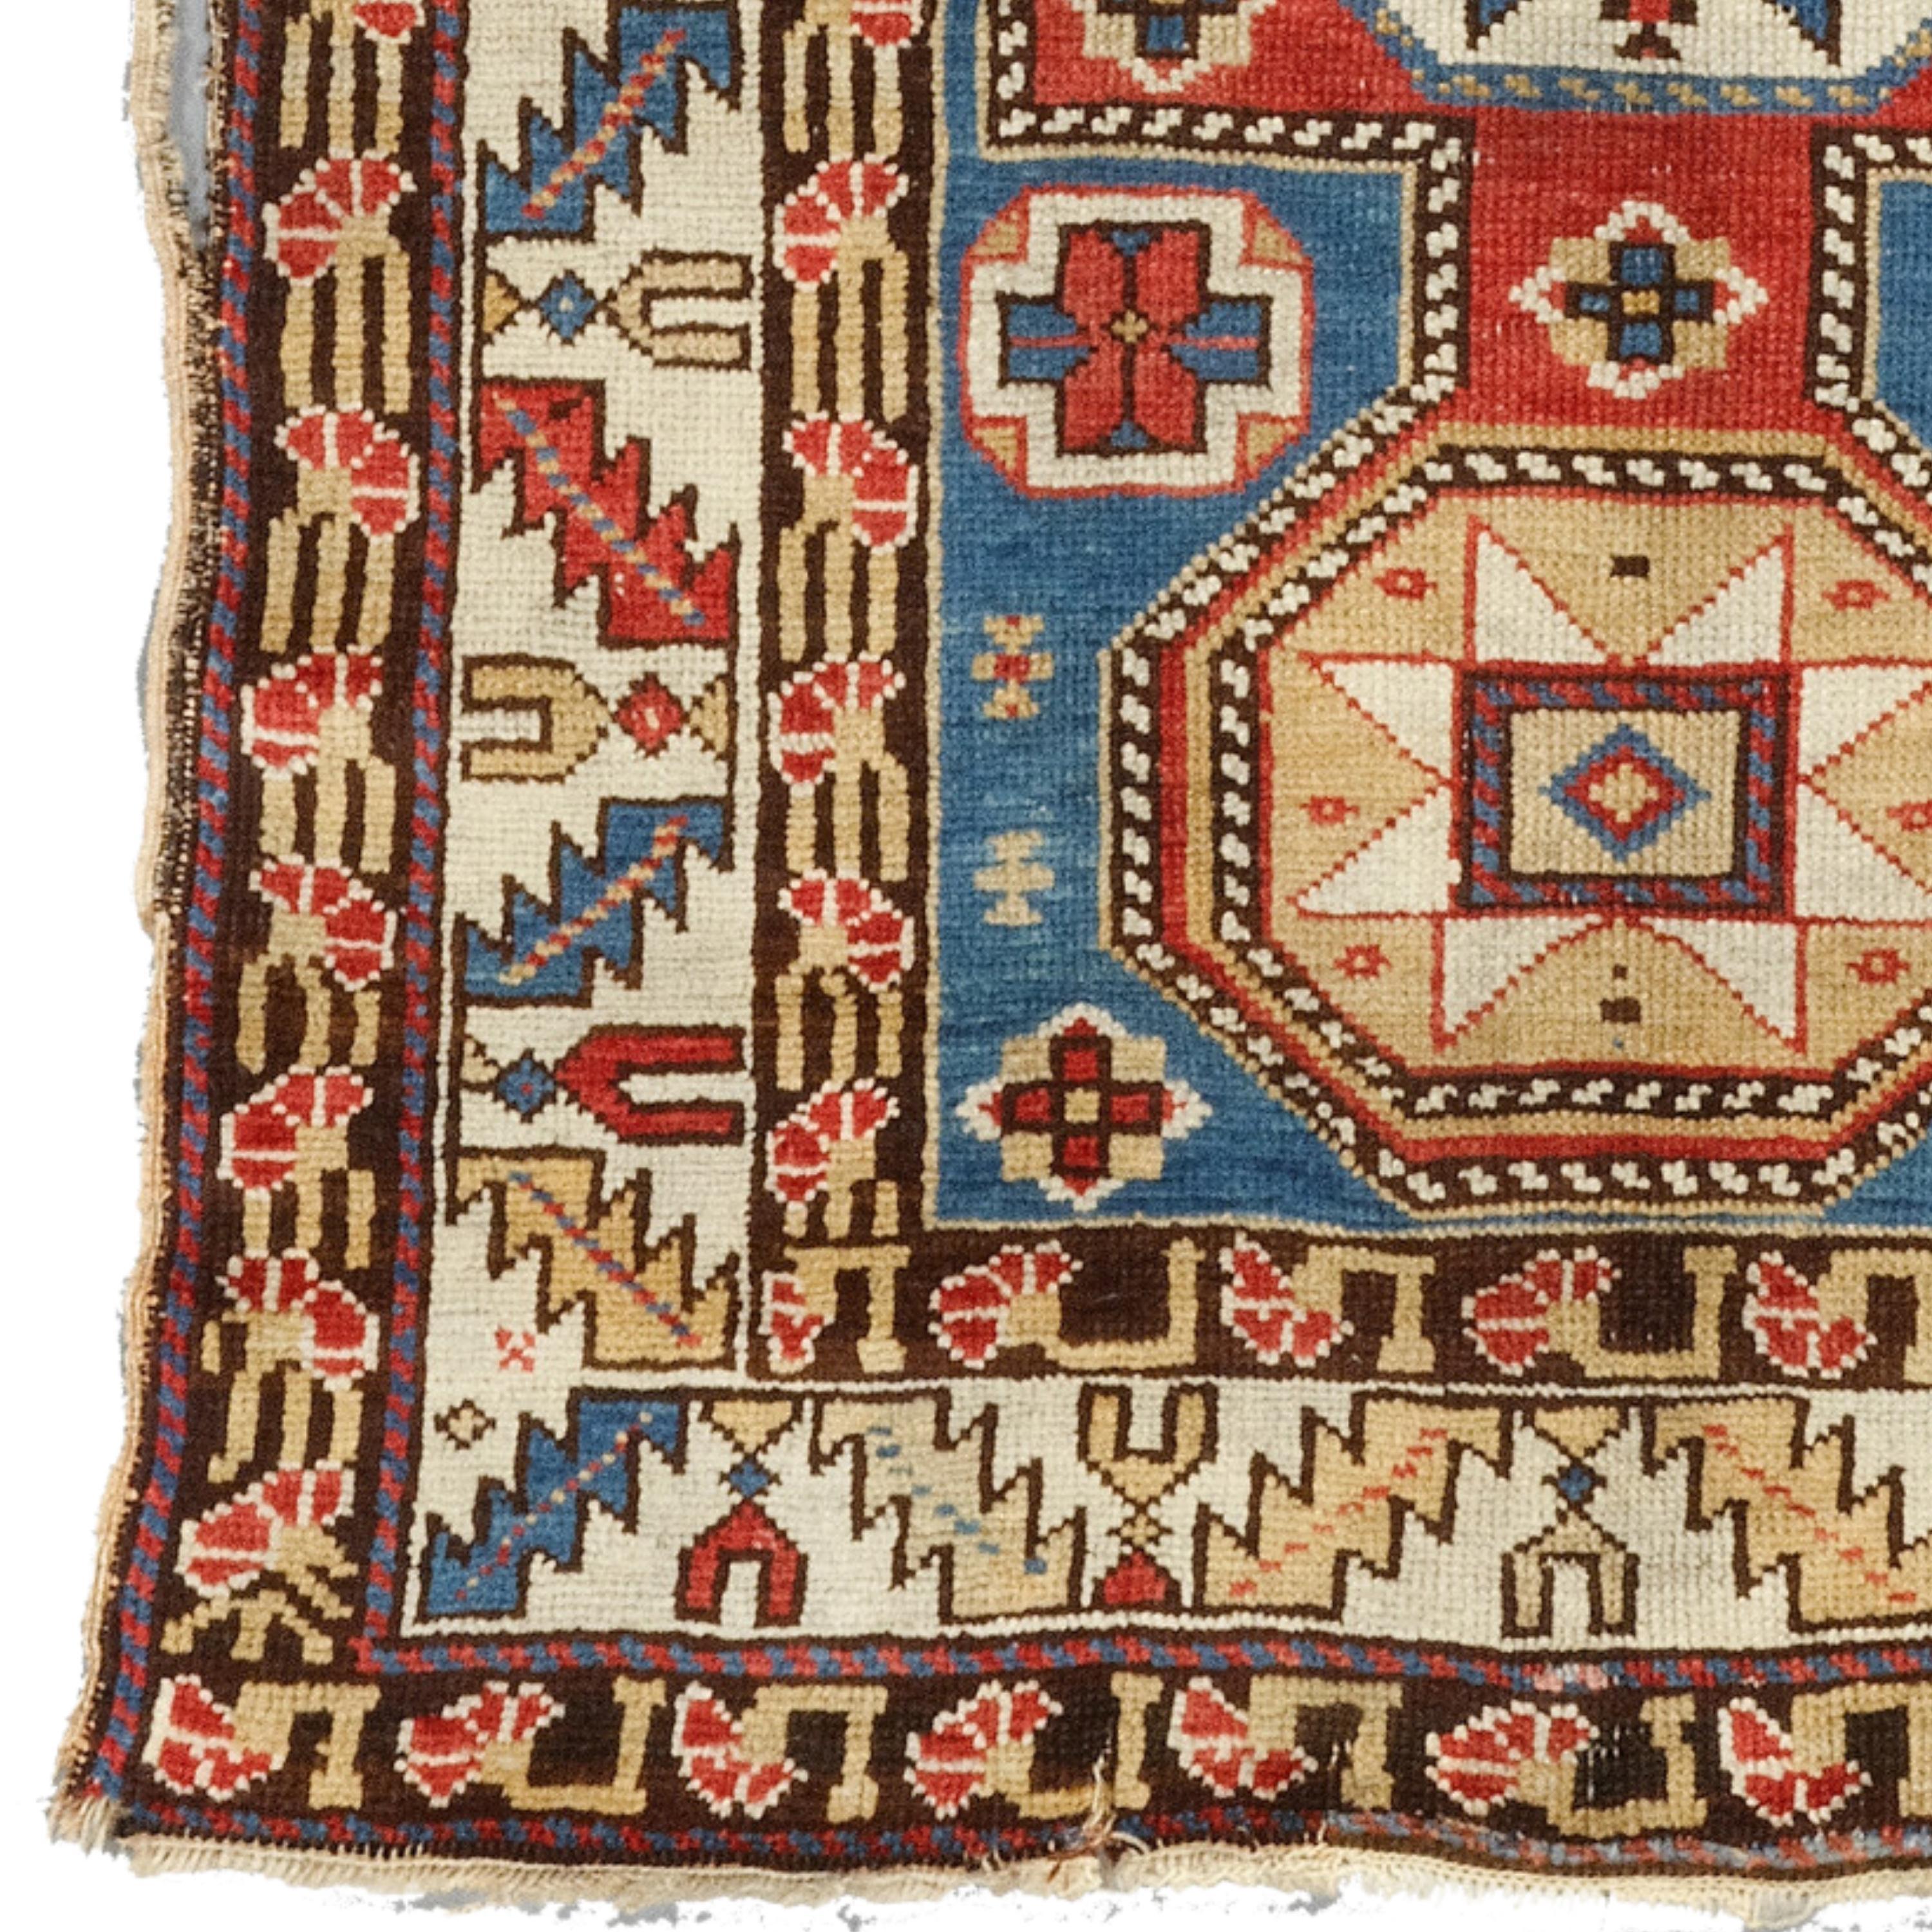 Antique Caucasian Shirvan Rug
Late Of The 19th Century Caucasian Shirvan Rug. in Good Condition
Size: 87 x 130 cm (34,2x51,1 In)

Shirvan rugs are often the most sought after antique rugs from the Caucasus. Shirvan rugs were made not far from those